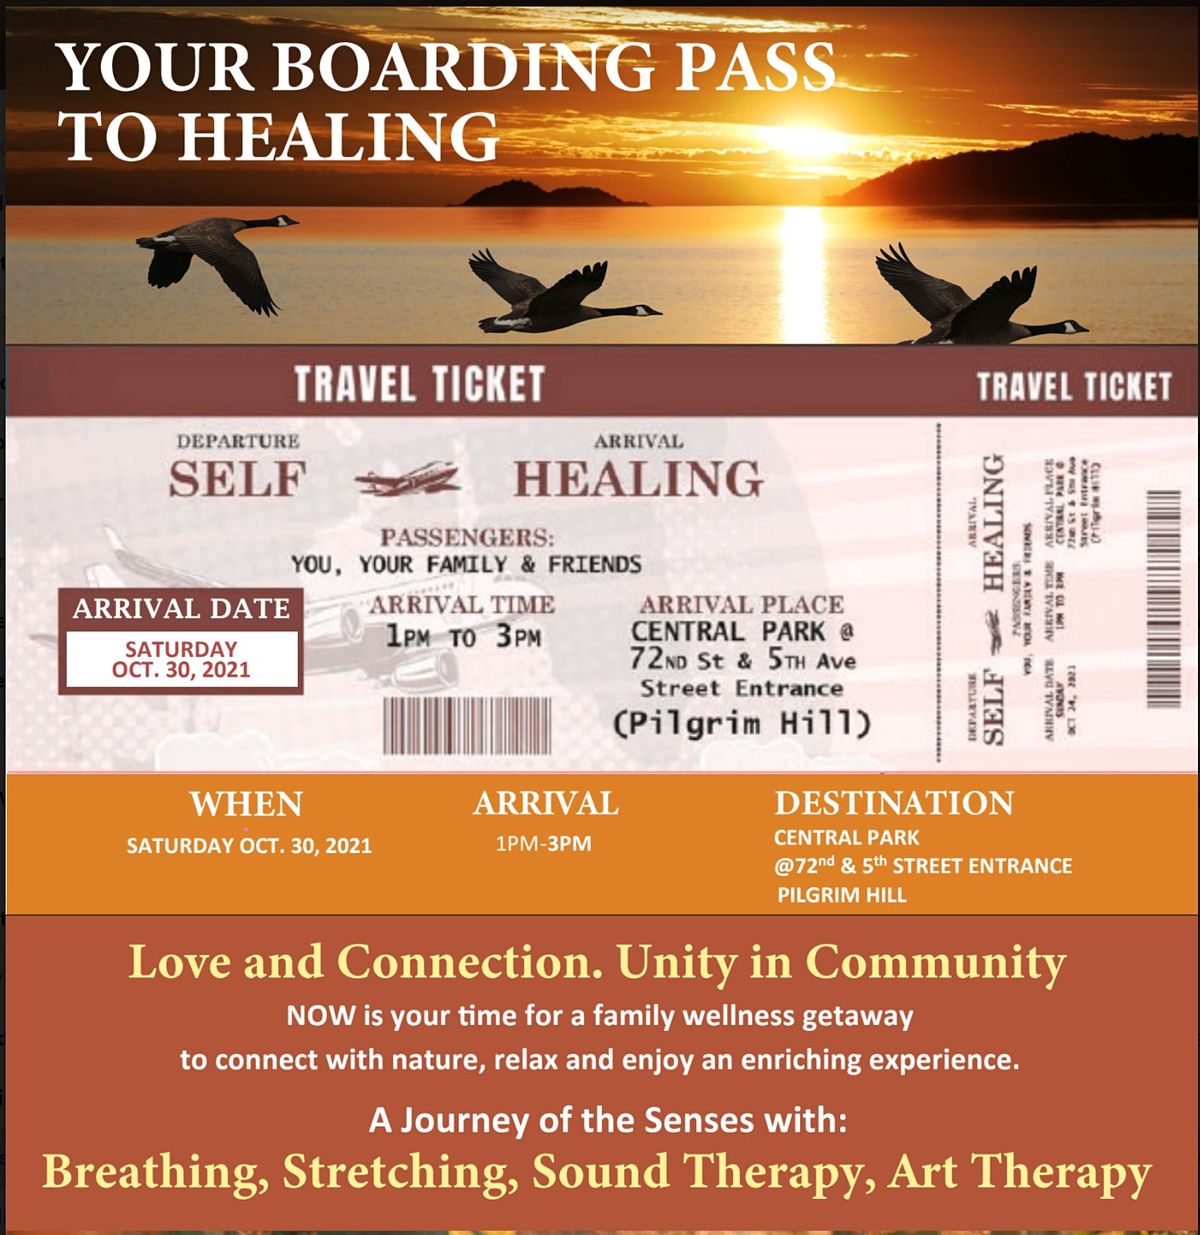 A Family Voyage of Healing & Connection